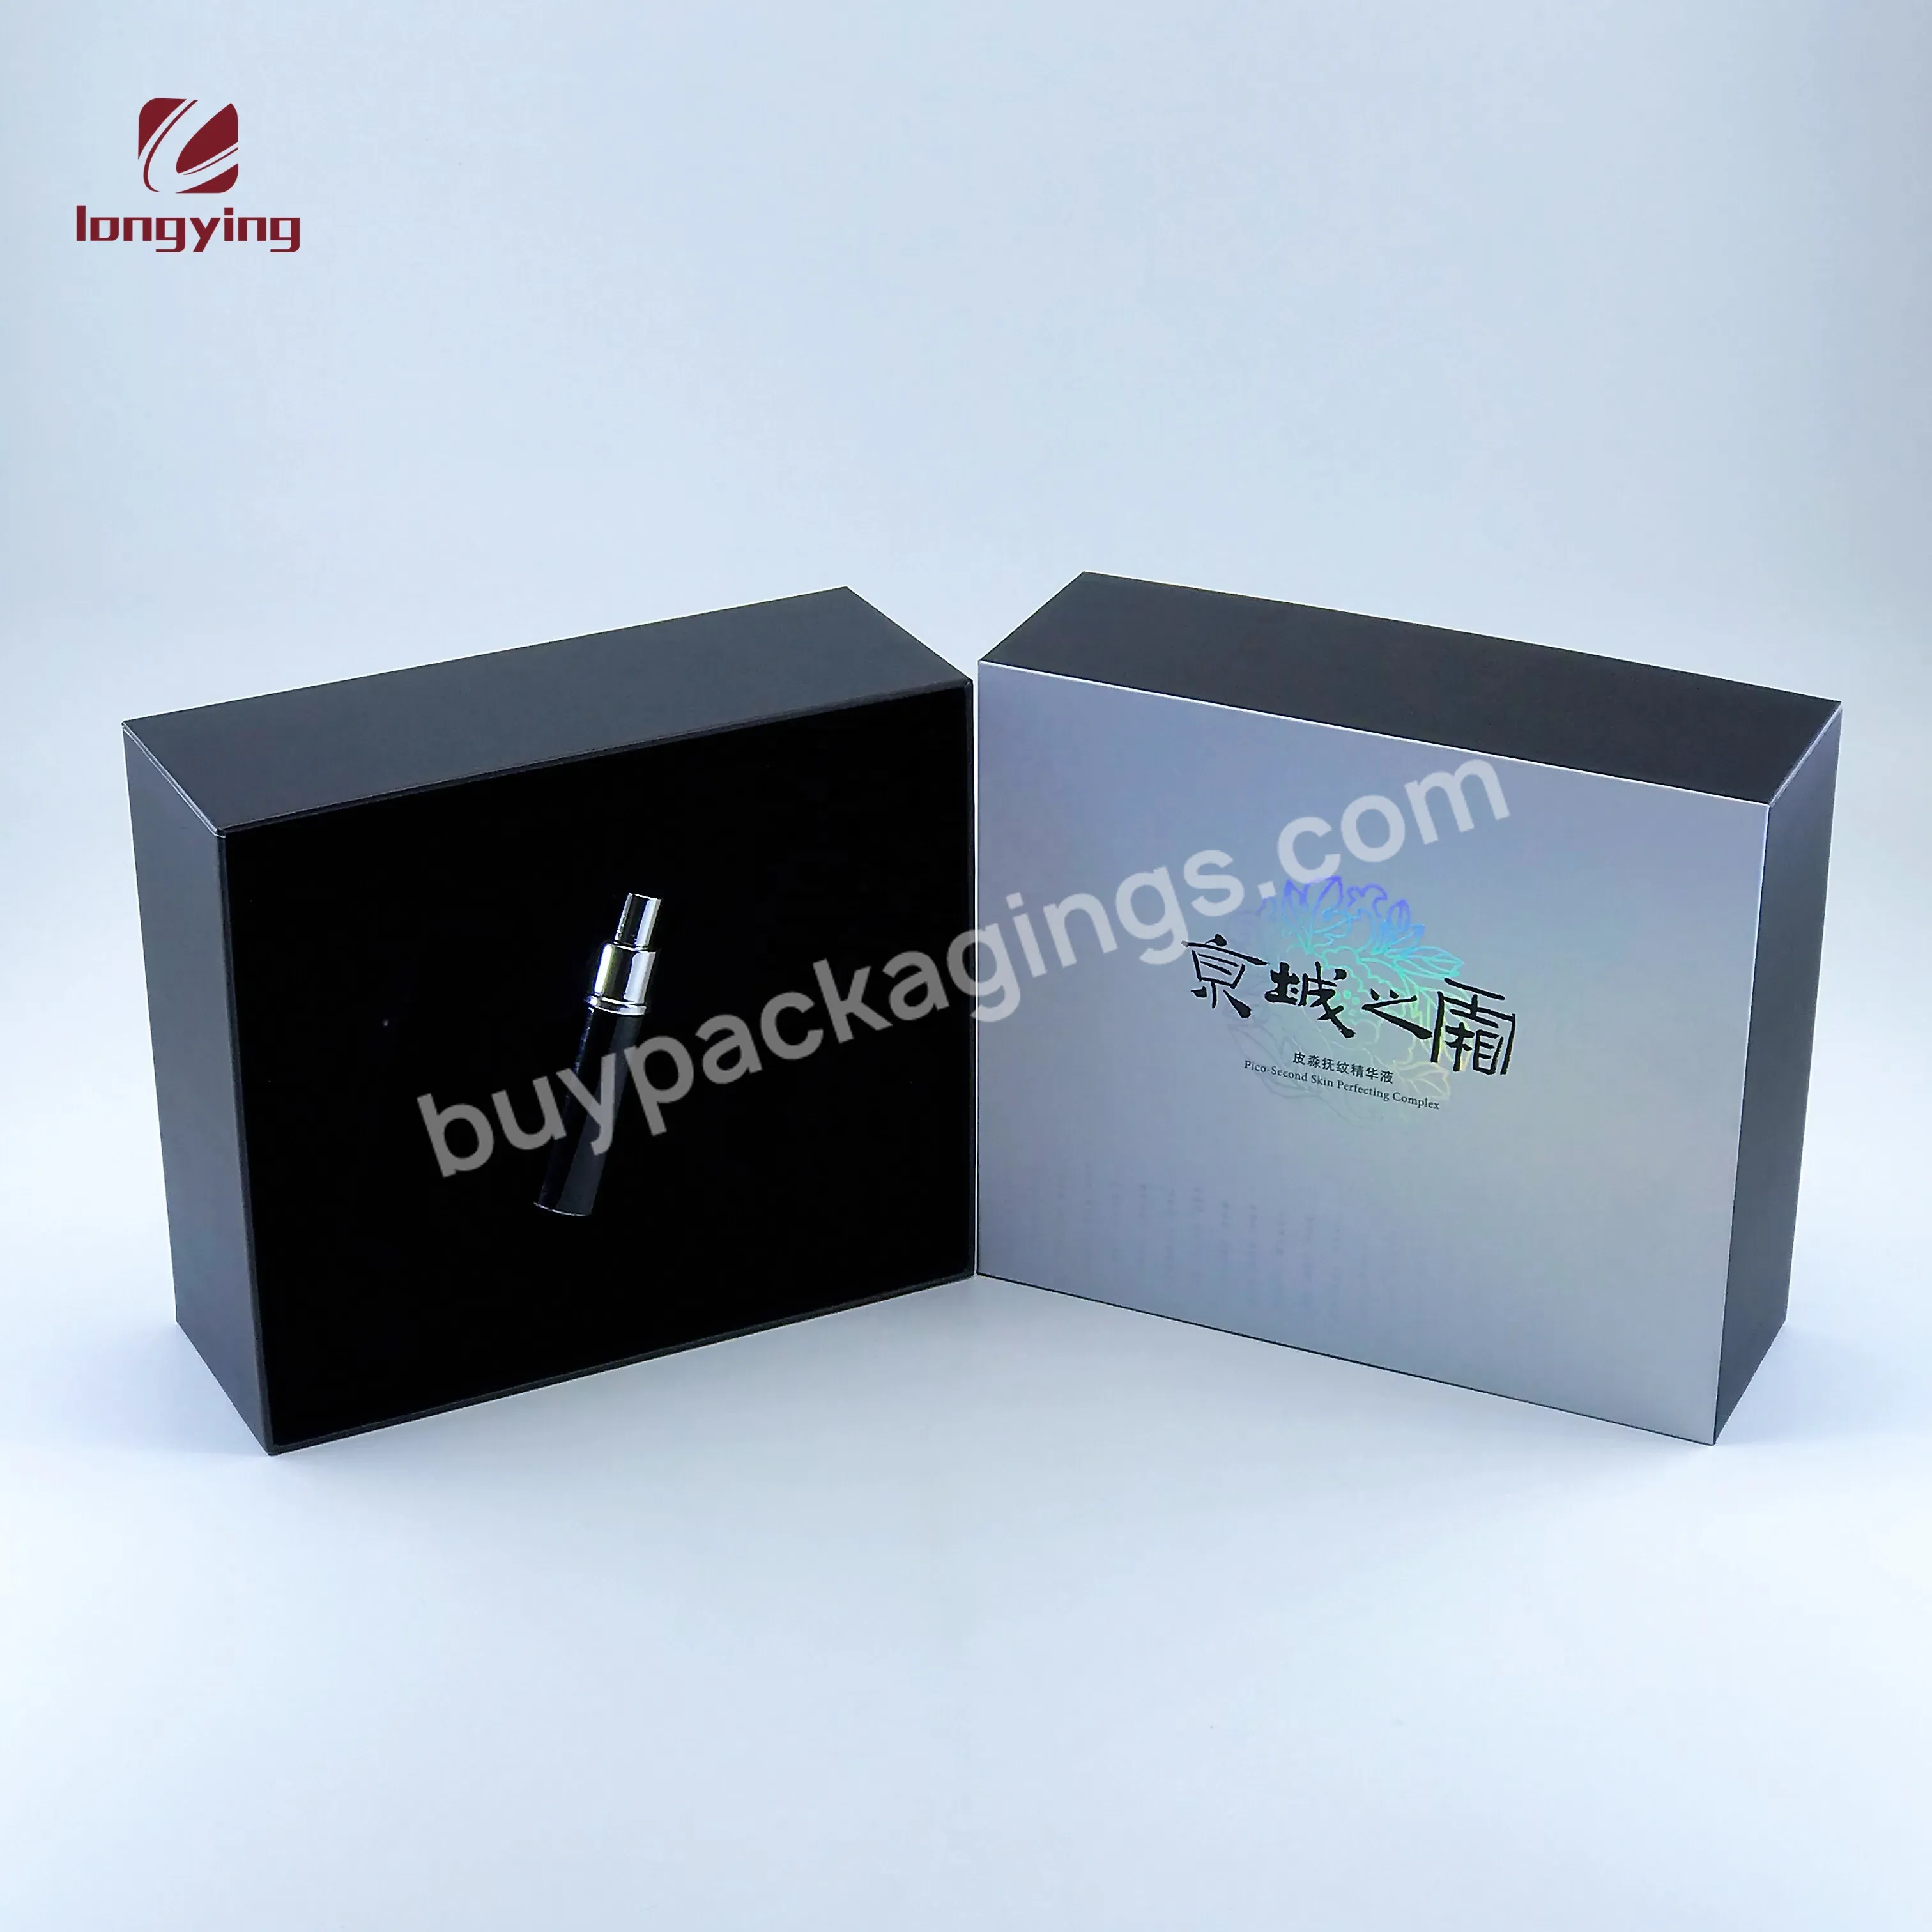 Custom China Small Boxes Luxury Laser Printer Boxes Cardboard With 3 Pcs Lipstick Spray Lipstick For Cosmetic Packaging - Buy China Small Boxes Luxury Laser Printer Boxes Cardboard,3 Pcs Lipstick Spray Lipstick,Cosmetic Packaging.